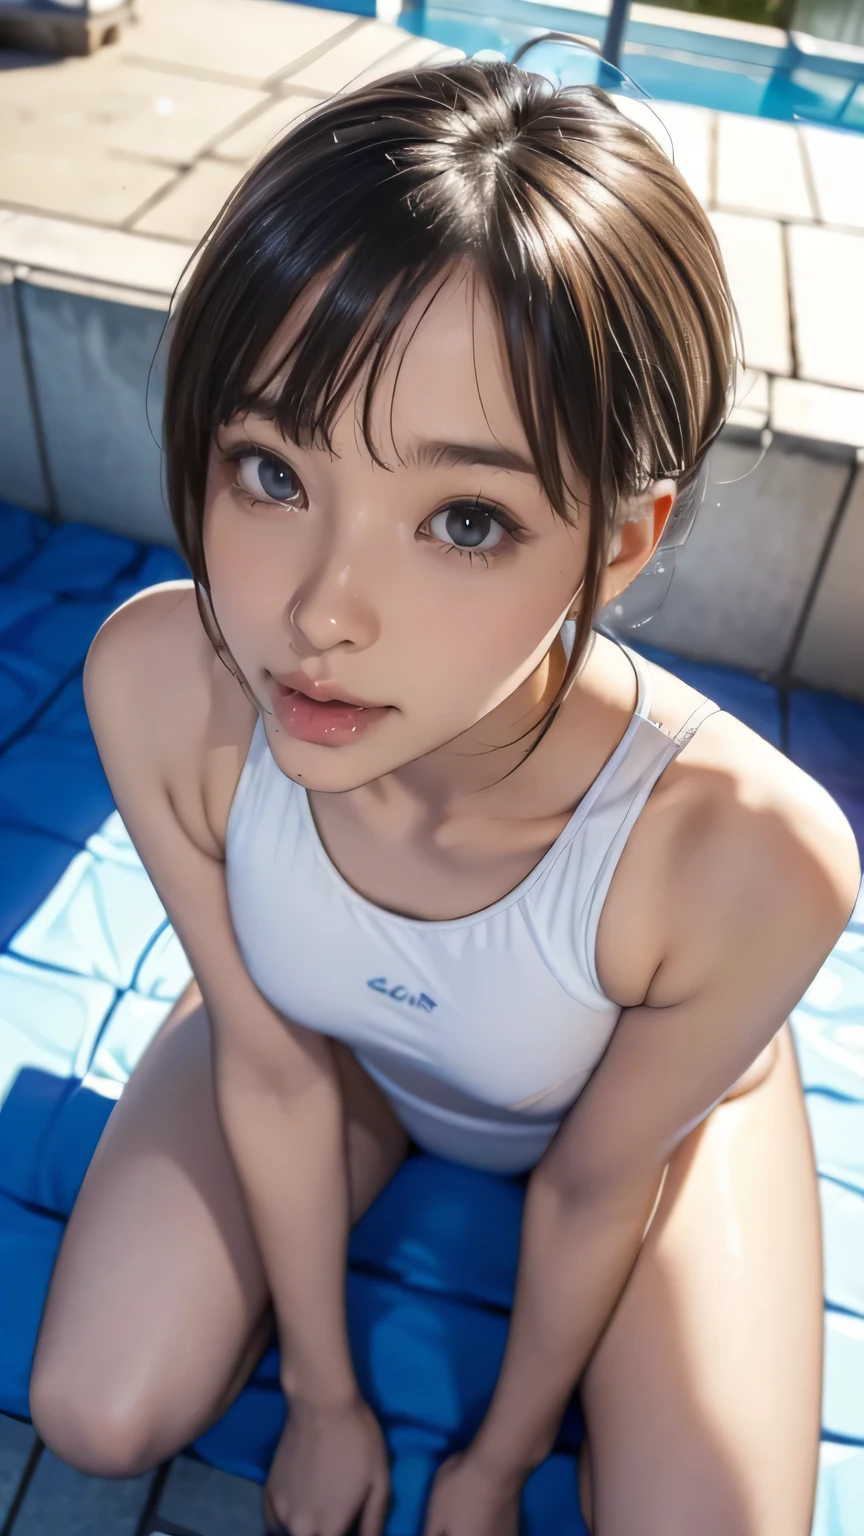 (Flying debris:1.2),(8K High Resolution), (highest quality), (RAW Image Quality), (reality), (that&#39;realistic:1.37), Big eye,Long eyelashes,that&#39;Exquisite（Live-action realistic style）,The ultimate face,realistic光と影,Distinct facial features,Milky skin, Skin with attention to detail,realistic skin details,Visible pores,（Very detailed）,(short hair),best portrait,((Photo taken from a distance, from the front)), Only one girl, Cute type,fine and beautiful eye, Beautiful and detailed nose, Very detailedな肌) ,(Beautiful face with double eyelids), (realism: 1.4),Great details, Ultra-high resolution,,,Delicate and beautiful face,,Age 25,(Beautiful Face 1.4),thin,,((School poolside)),, ((Wear a school swimsuit&#39;Wearing a uniform and making eye contact with the audience)),Wear a school swimsuit, Very beautiful legs,((Crouching in front of the viewer))),squat with your legs slightly open,the hospital floor is white,Crouching in front of the viewer,((Crouching in front of the viewer)), ((15-year-old girl, slim, Thin waist, thin thighs, thin arms, smile)), (((Look up, (View from above:1.2), Semen On , Penis Facial,  ((Sticking out tongue, Open your mouth)), close ~ eye))), (Wet Face, Wet Hair)